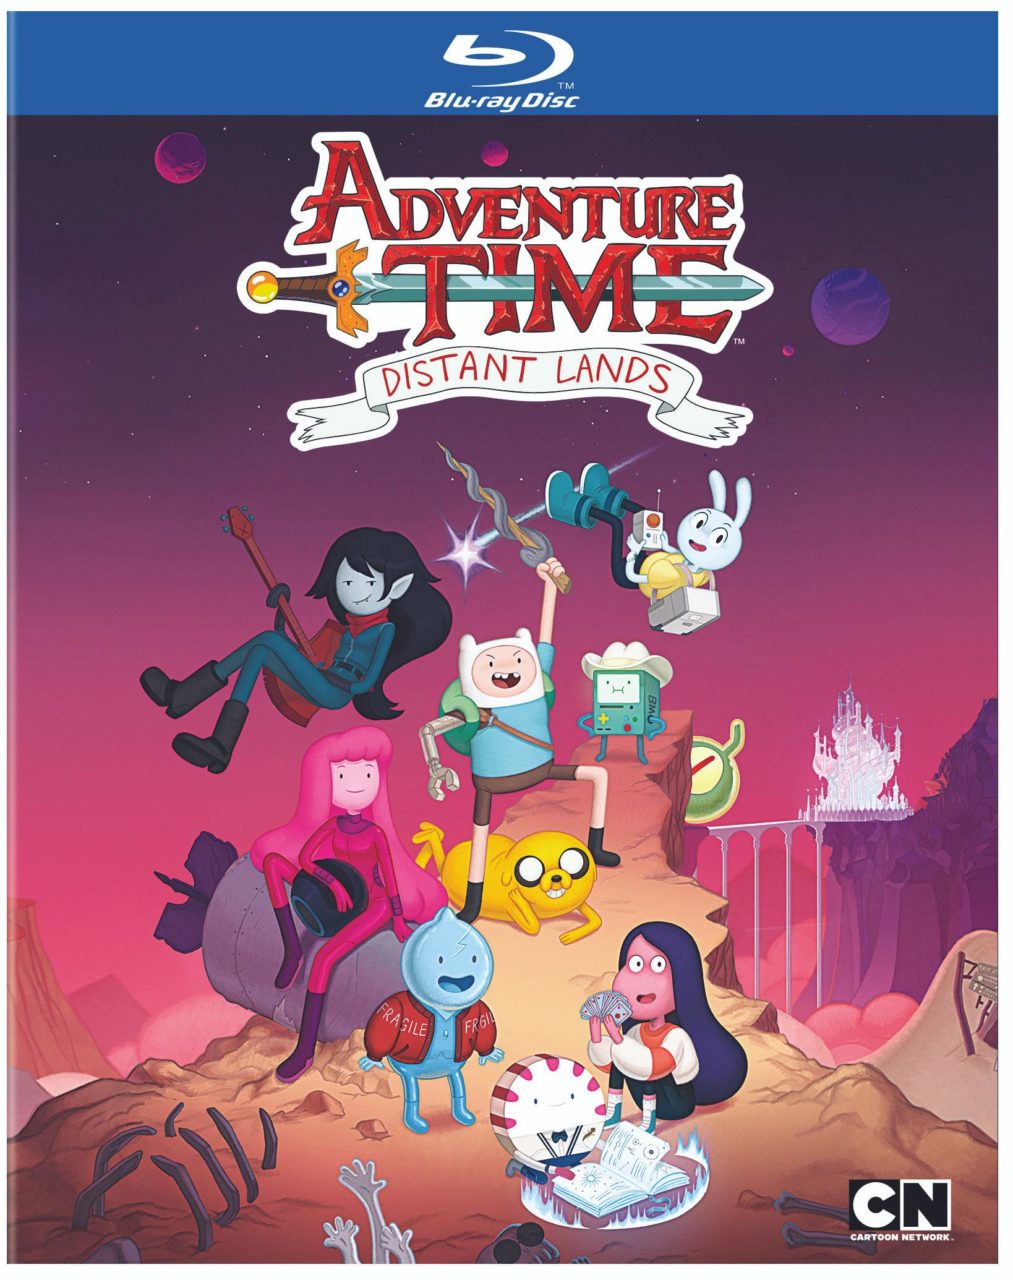 Adventure Time: Distant Lands Blu-Ray cover (Warner Bros. Home Entertainment/Cartoon Network)